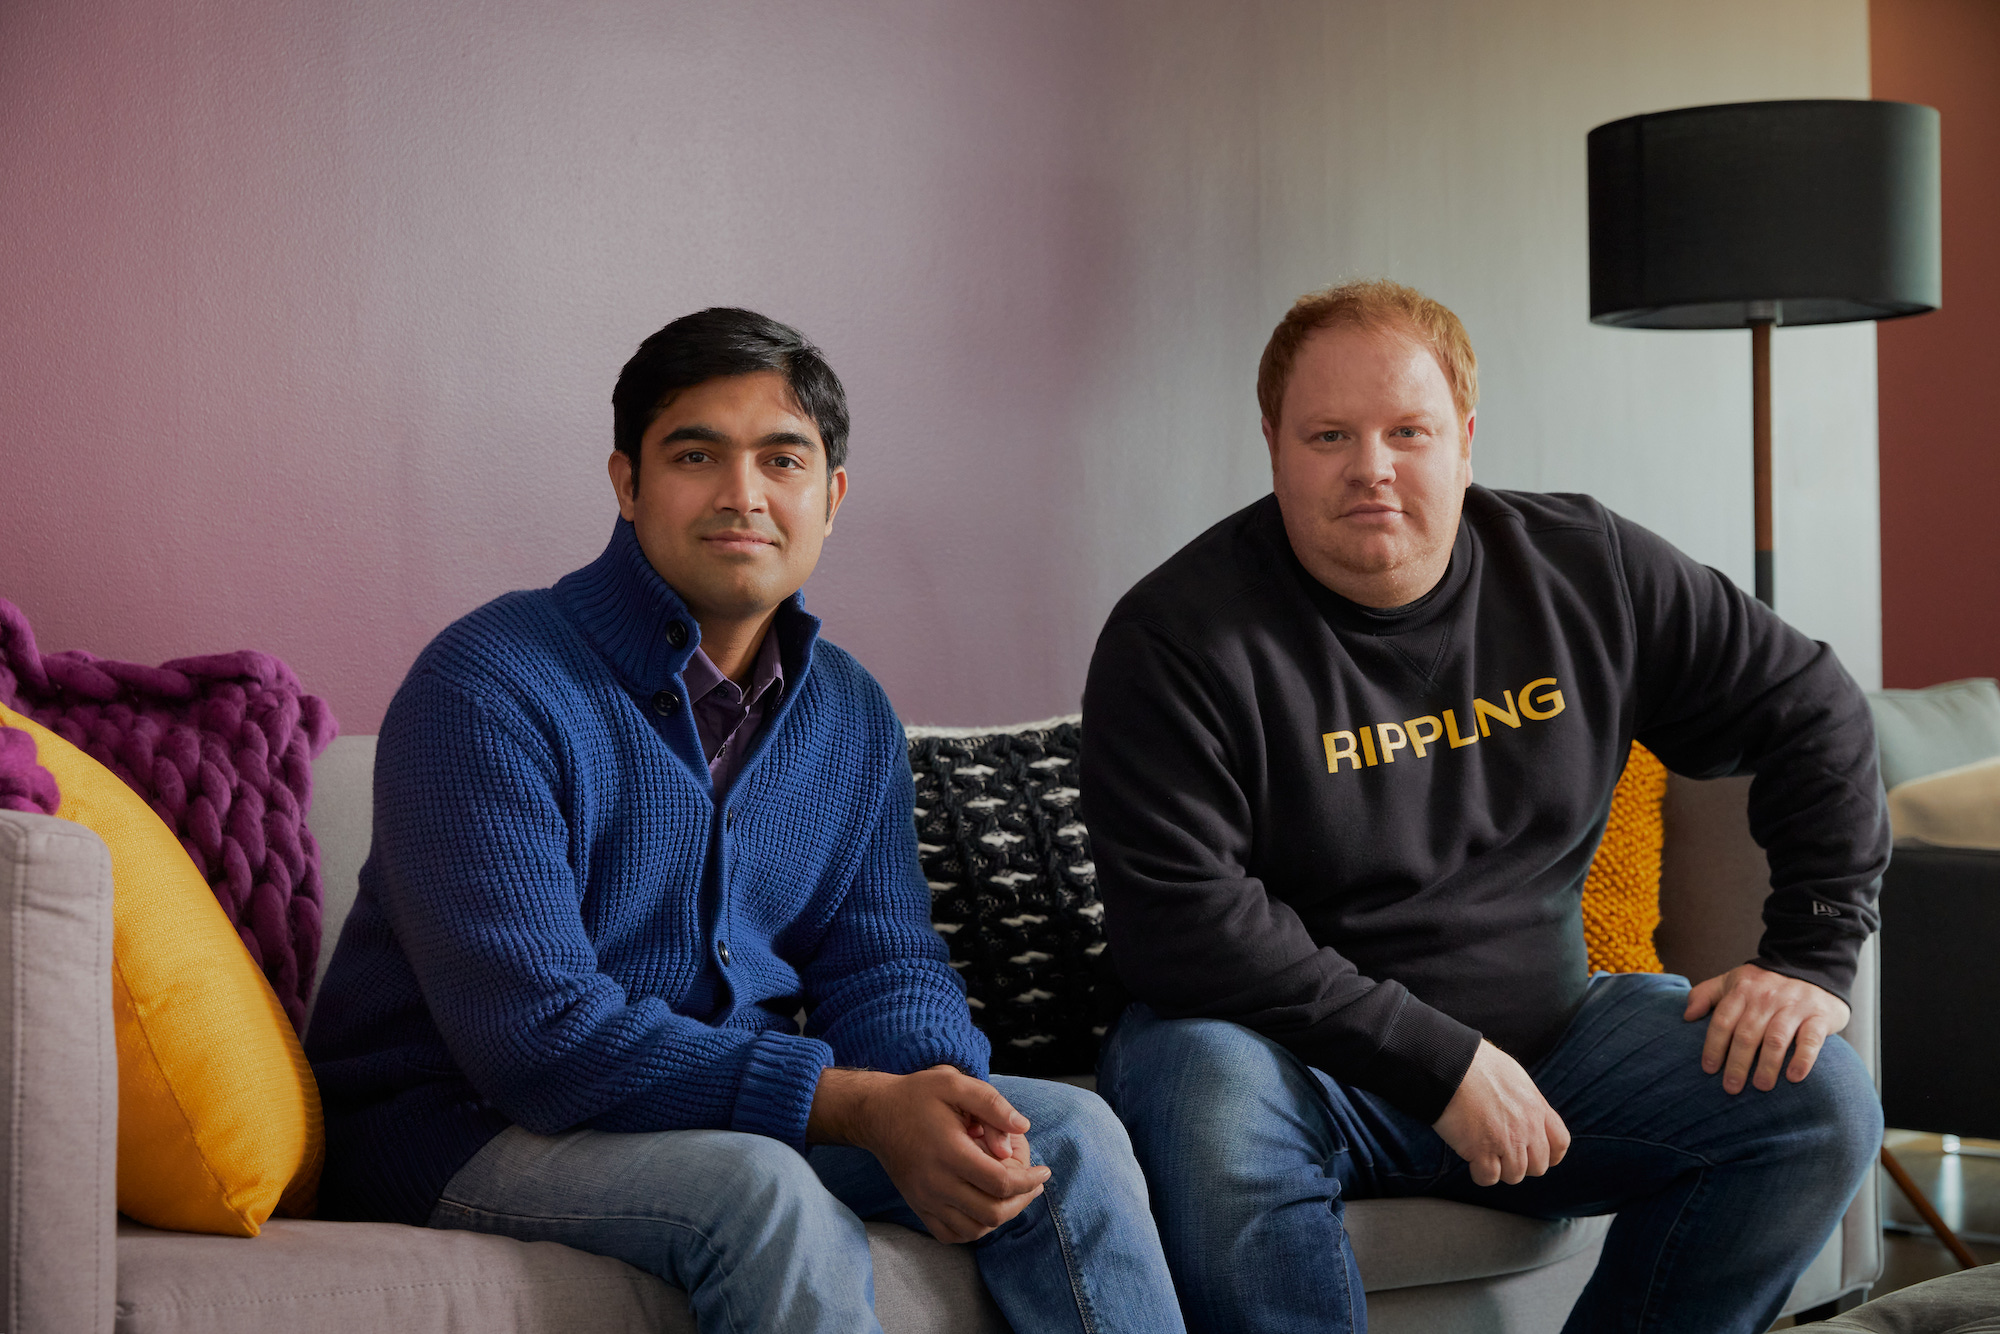 Rippling co-founders Prasanna Sankar (left) and Parker Conrad (right) pose together for a photo.